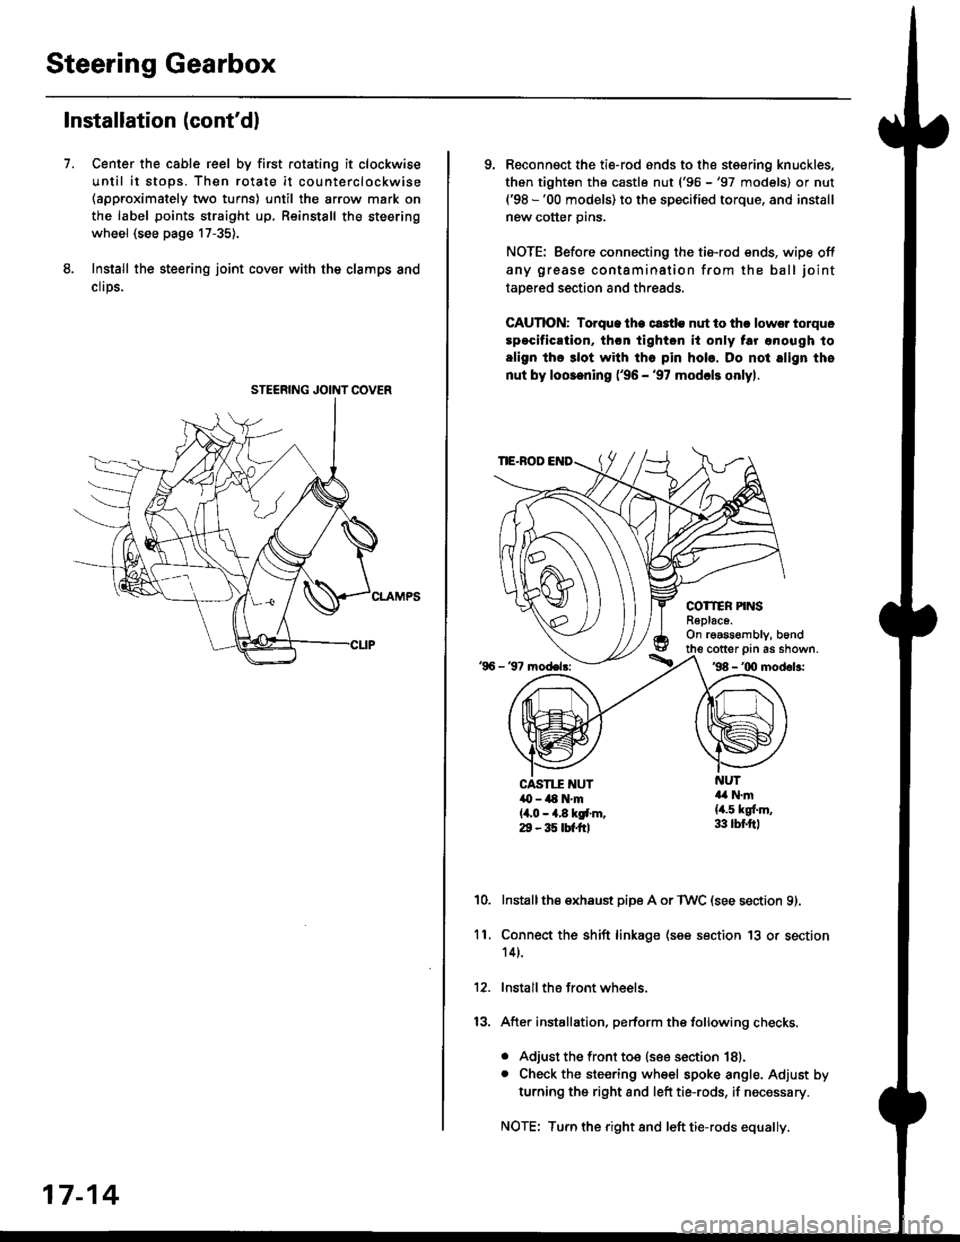 HONDA CIVIC 1997 6.G User Guide Steering Gearbox
Installation (contdl
Center the cable reel by first rotating it clockwise
until it stops. Then rotate it counterclockwise(approximately two turns) until the arrow mark on
the label p